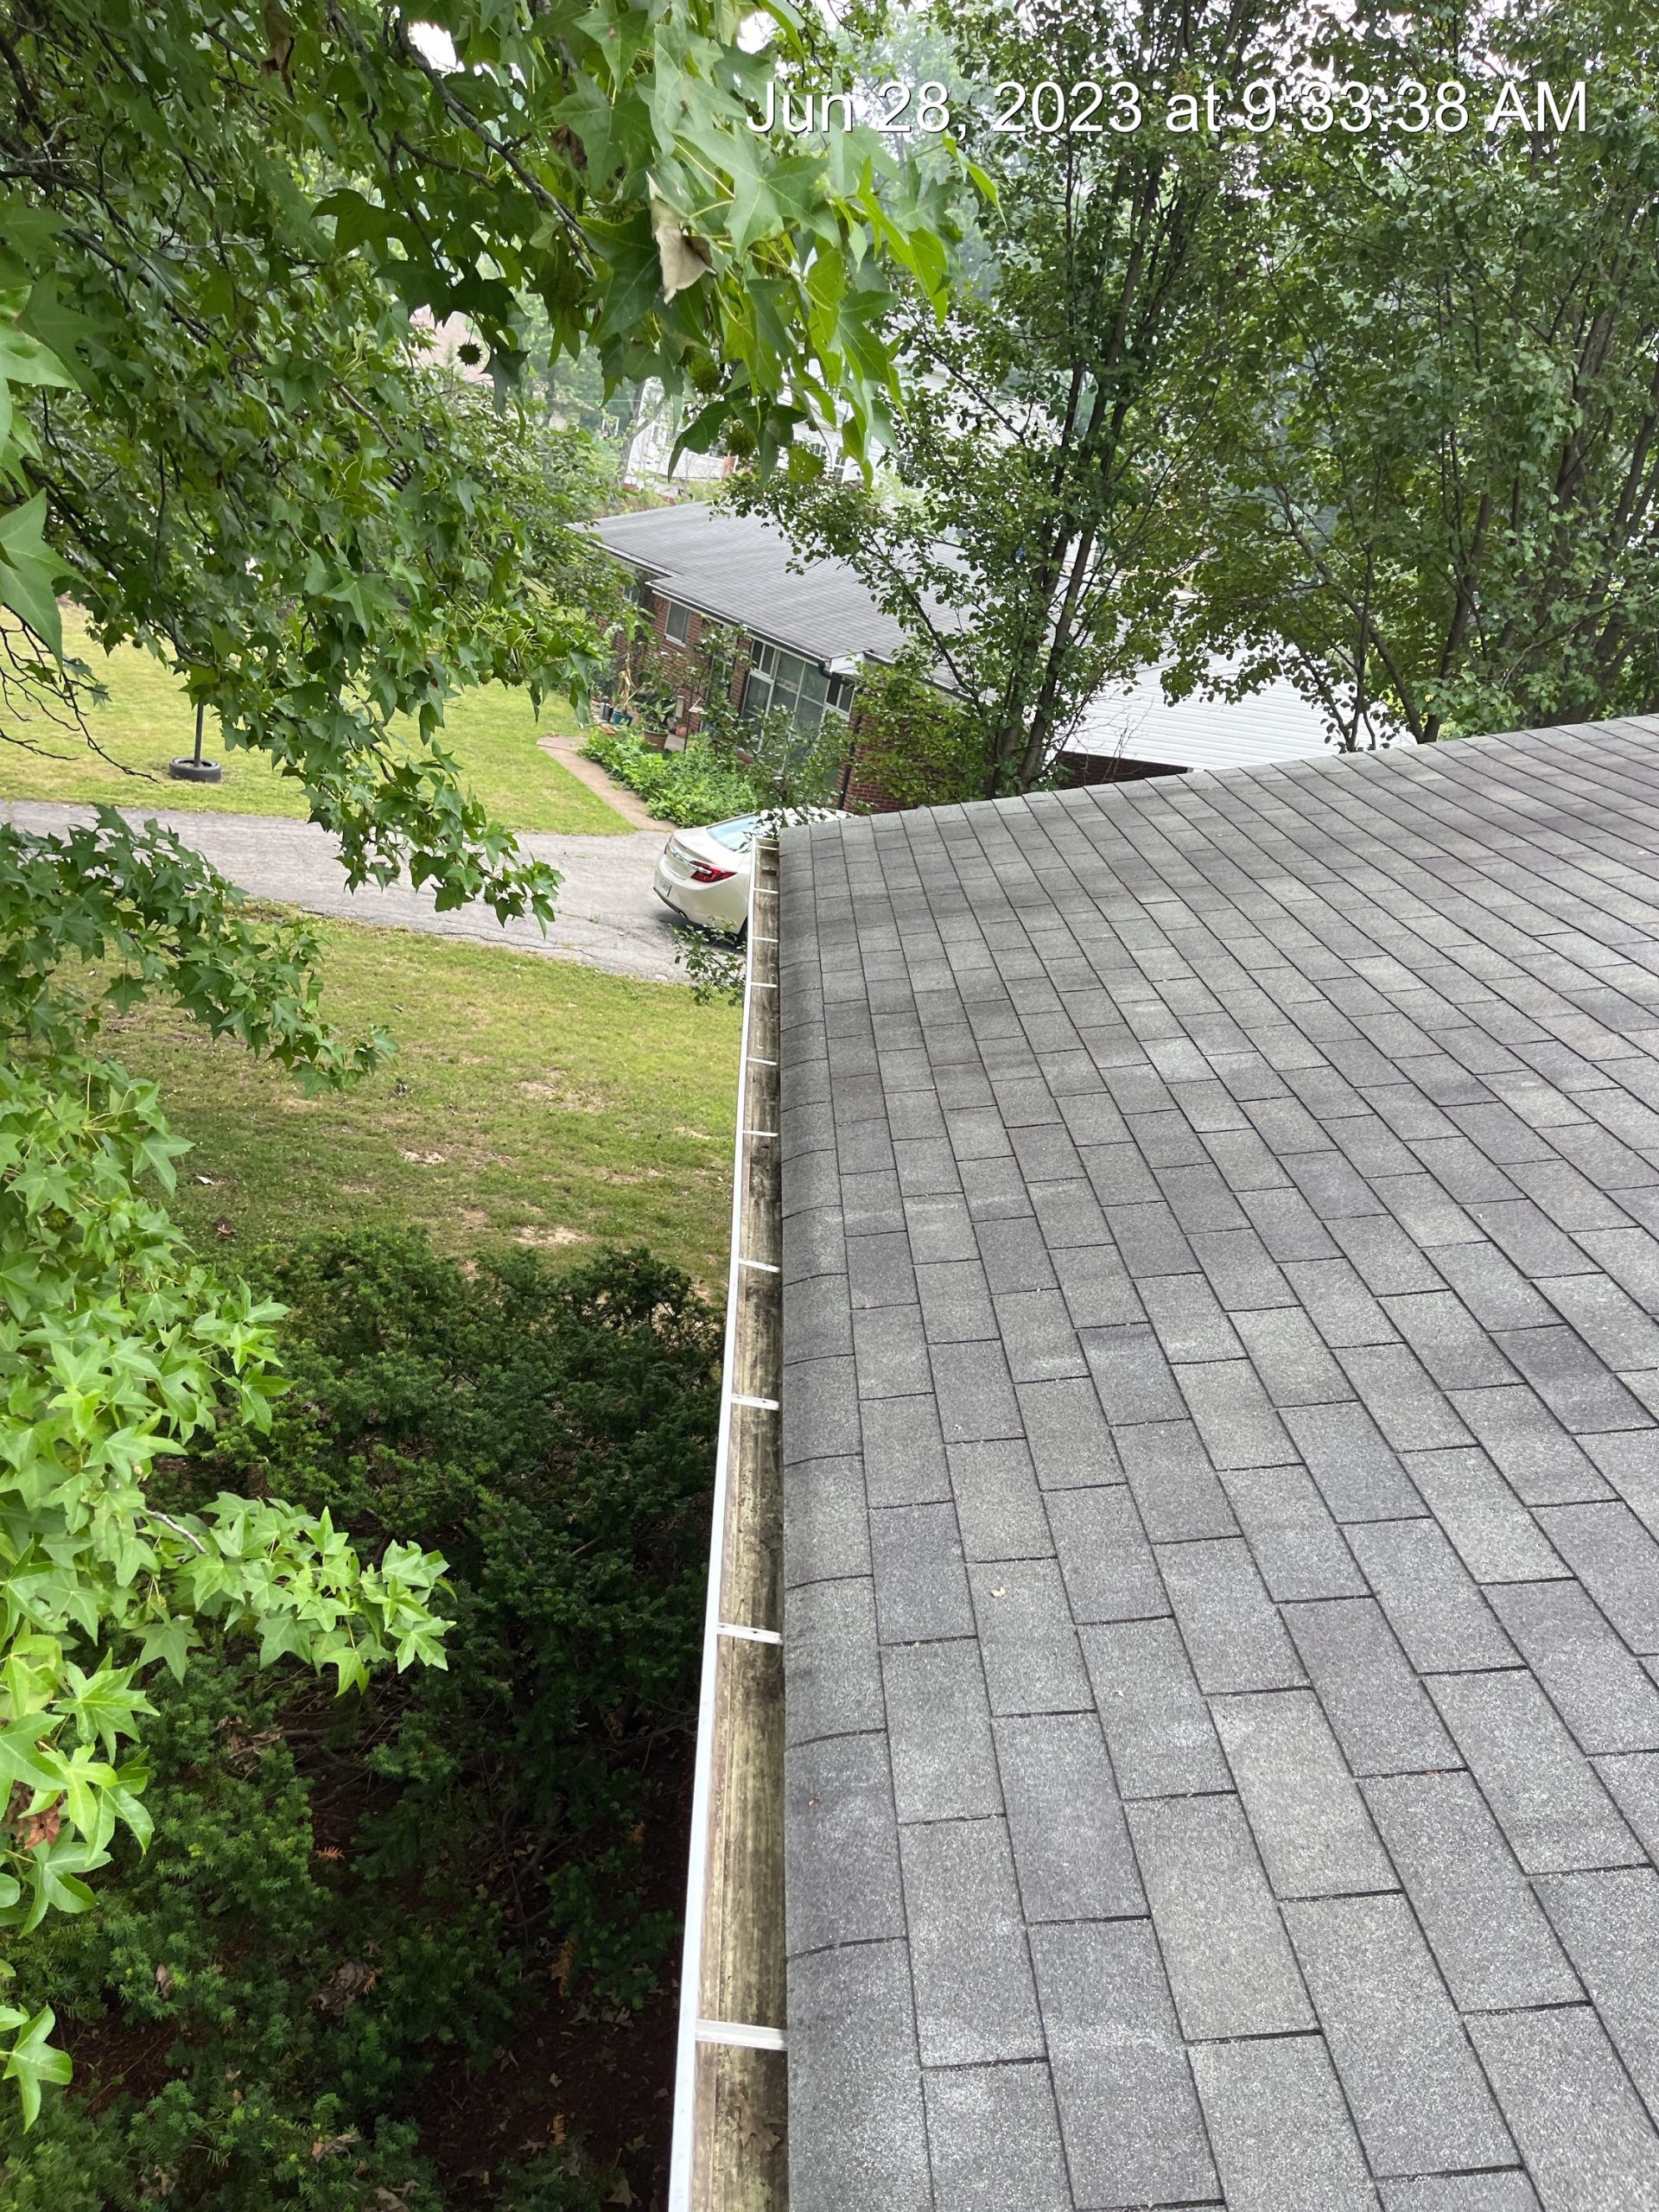 Gutter Cleaning Service in Roanoke for Blake's home